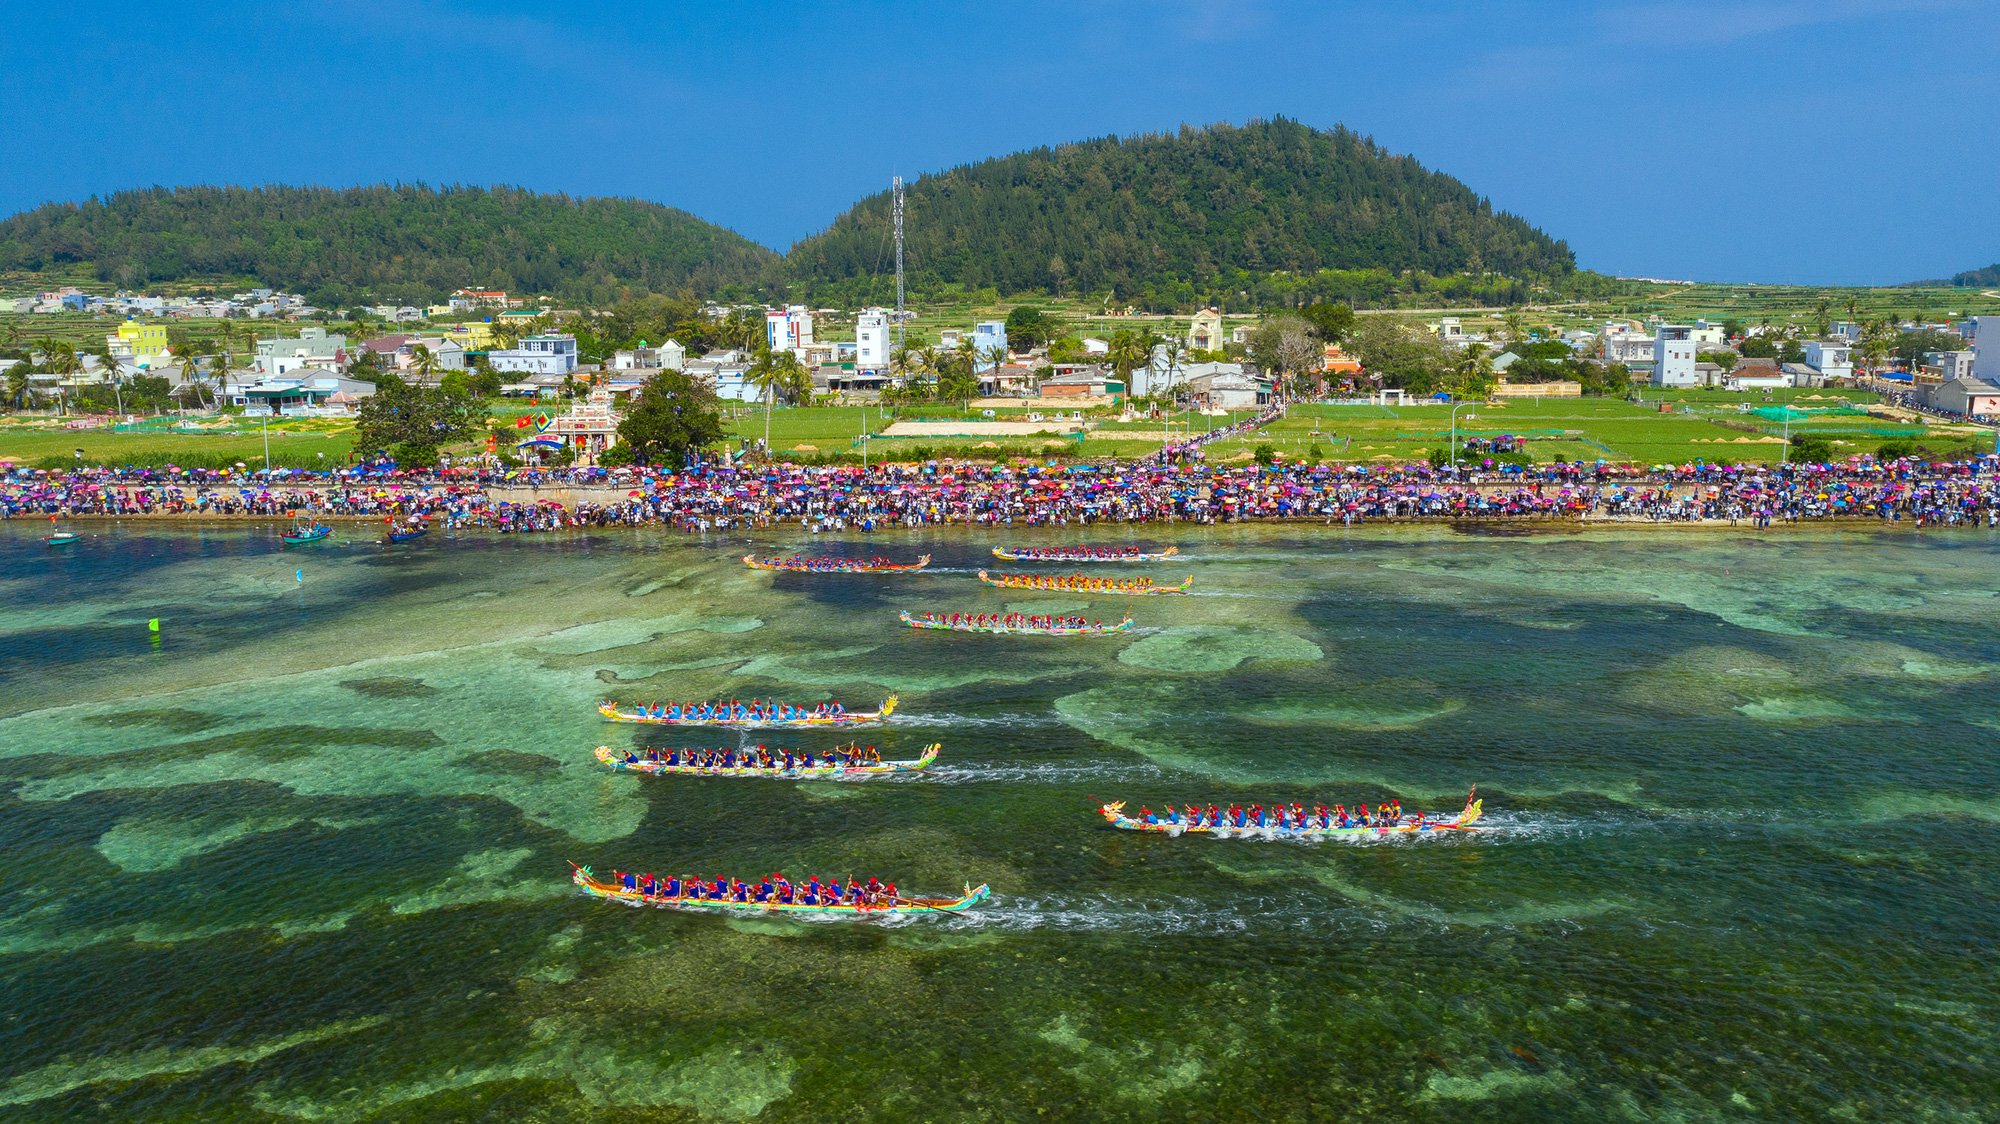 Teams compete at the Tu Linh boat racing festival in Ly Son District, Quang Ngai Province, Vietnam. Photo: Bui Thanh Trung / Tuoi Tre